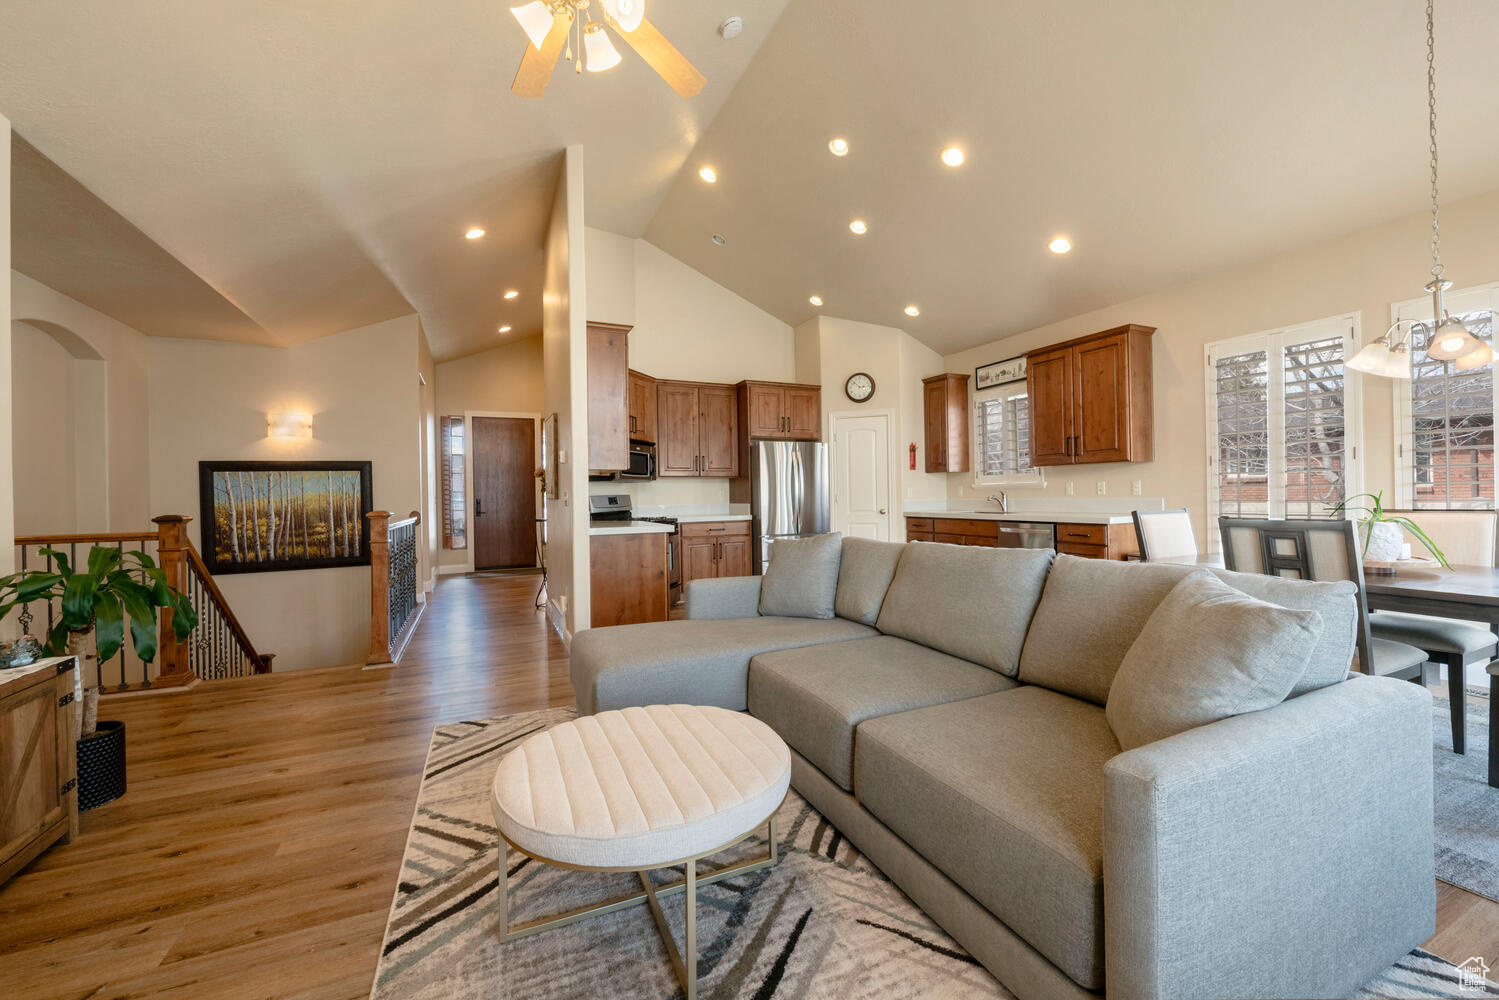 Living room with high vaulted ceiling, light hardwood / wood-style floors, and ceiling fan with notable chandelier